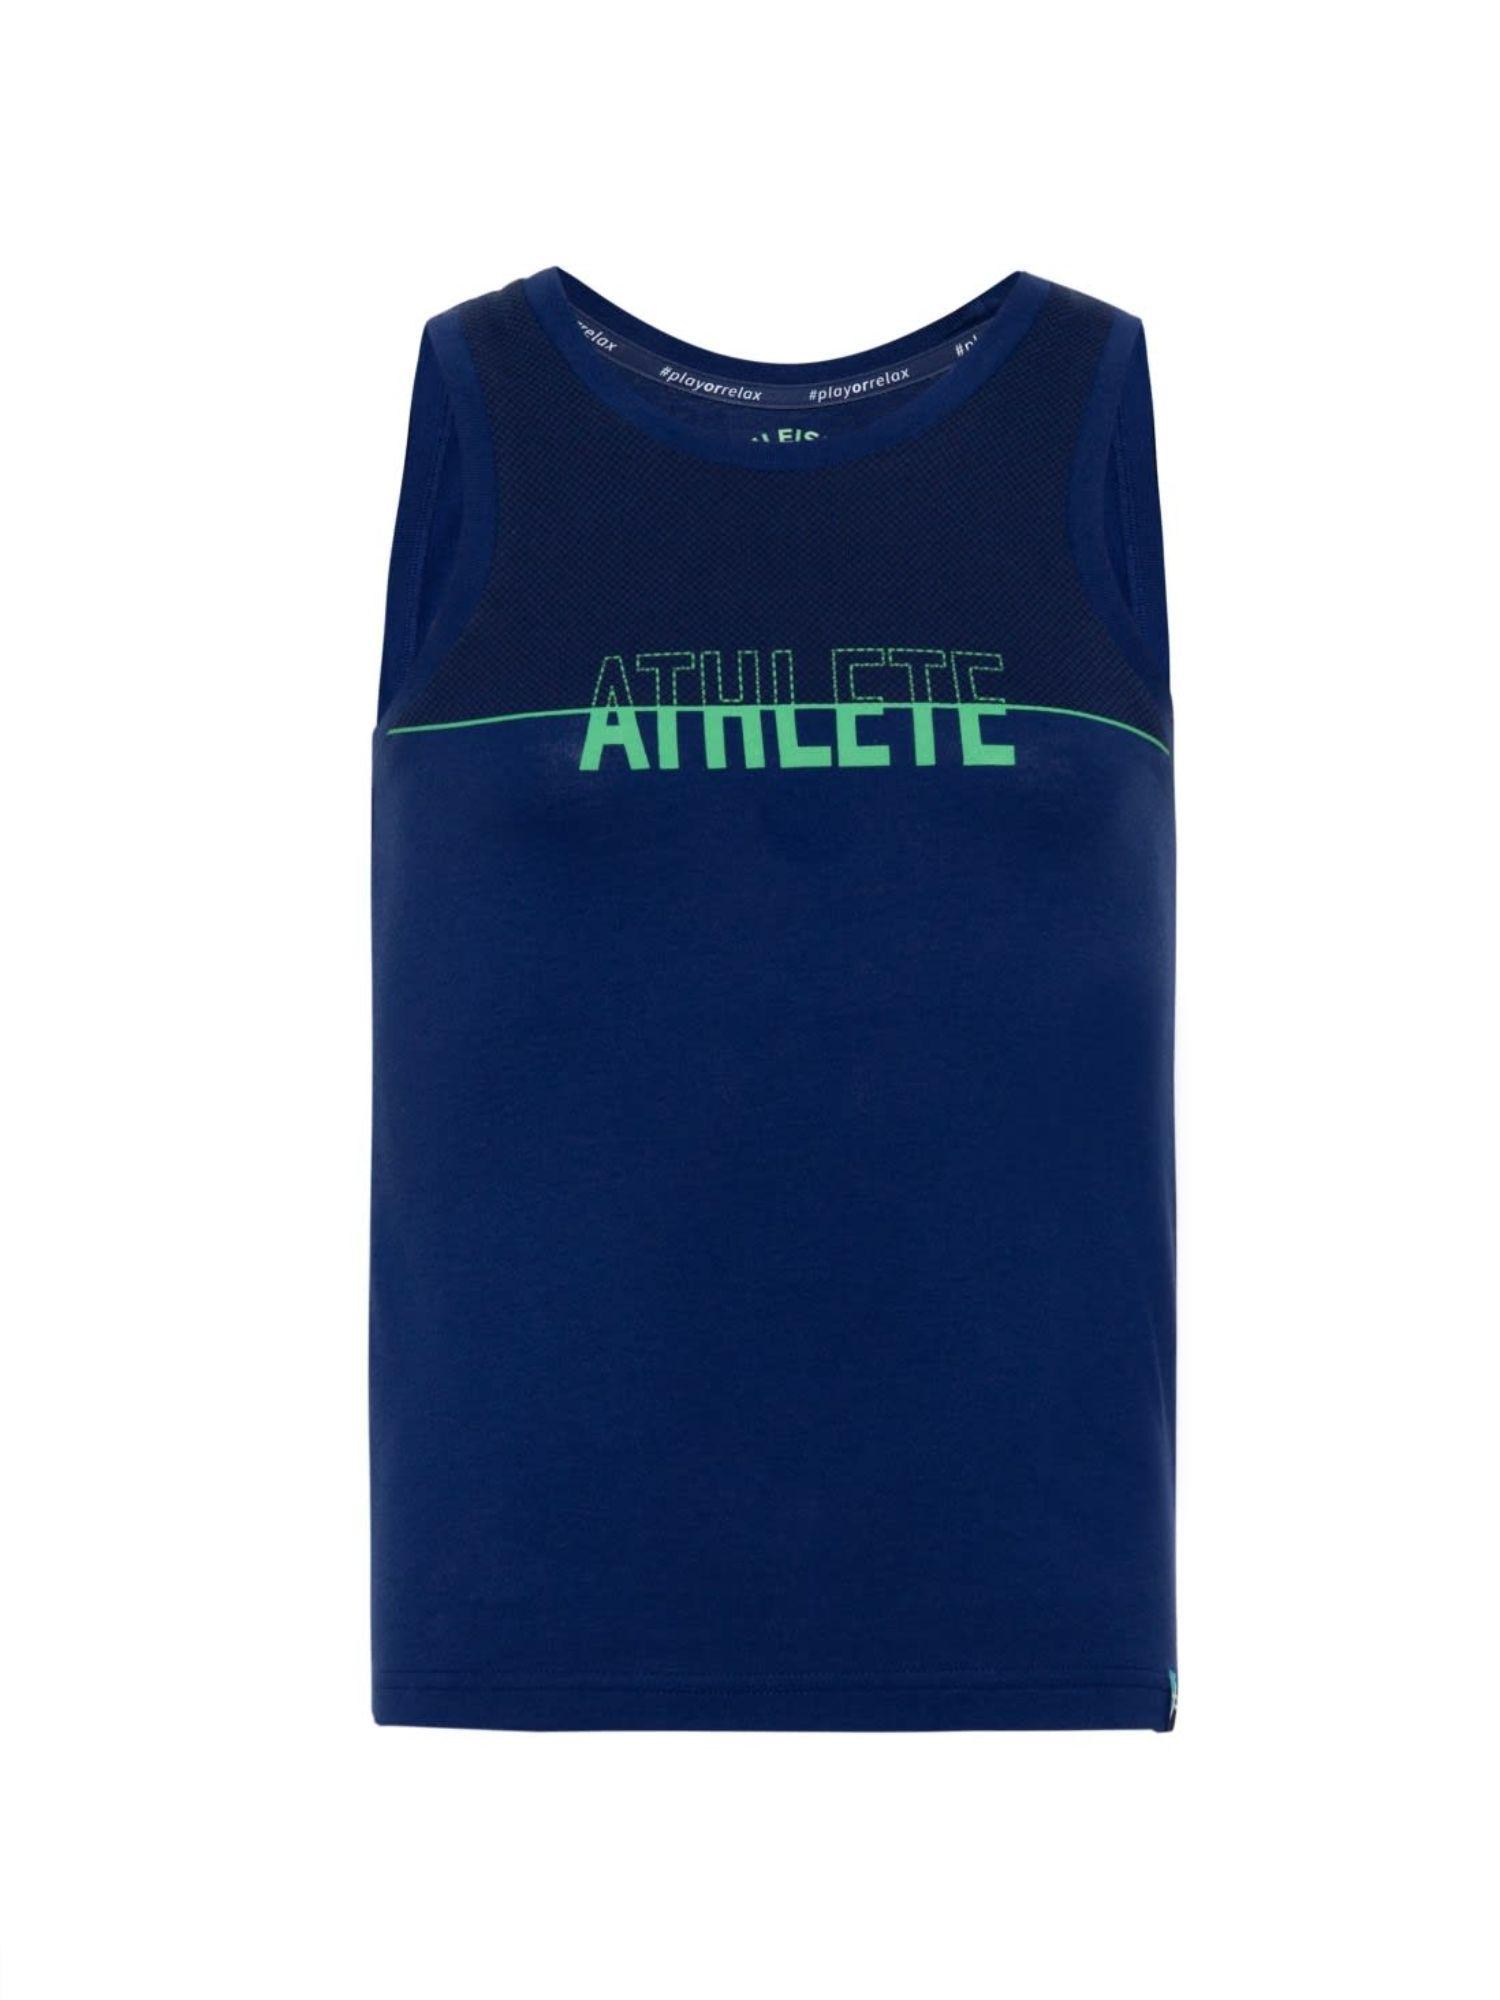 blue-depth-printed-muscle-tee---style-number---(ab14)